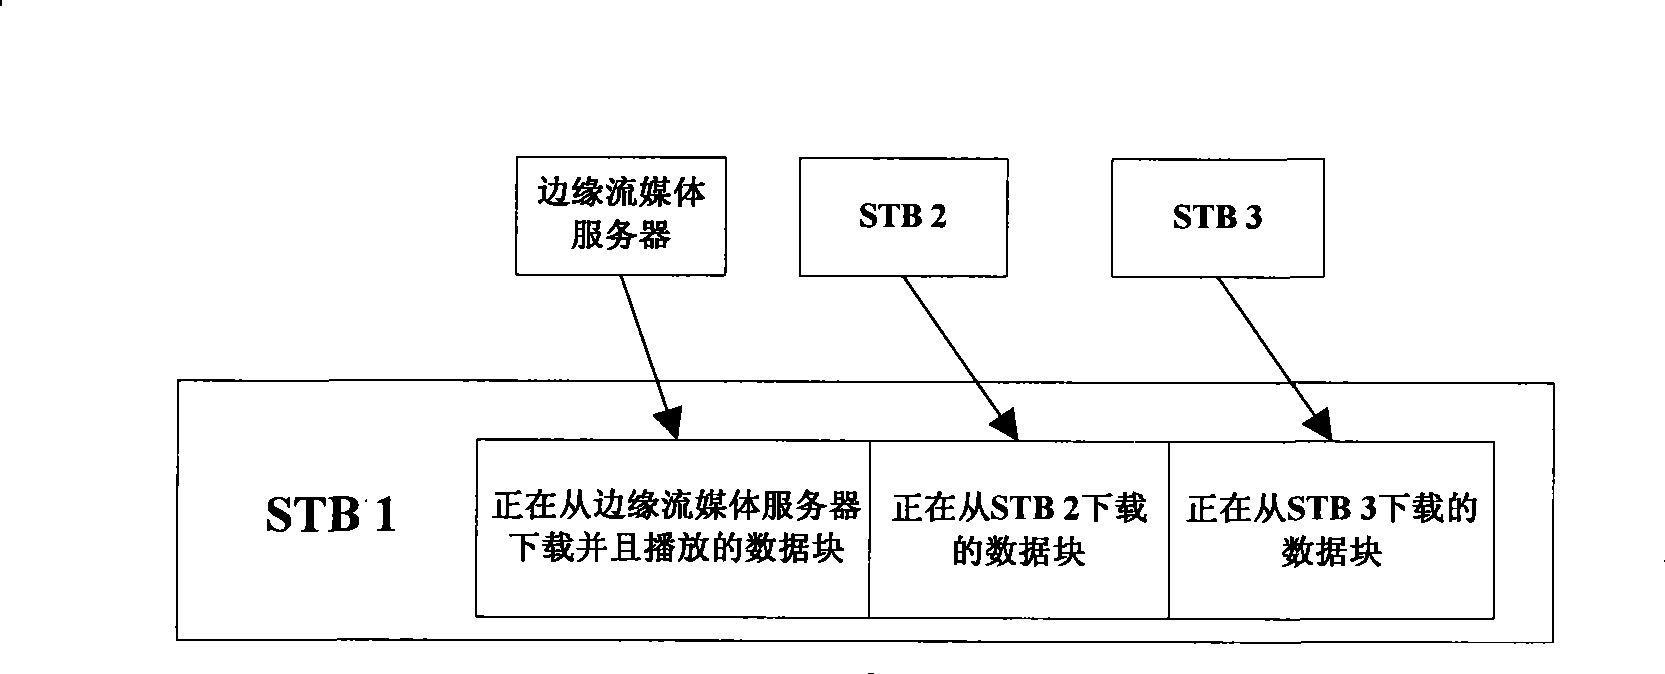 System and method for implementing internet television medium interaction